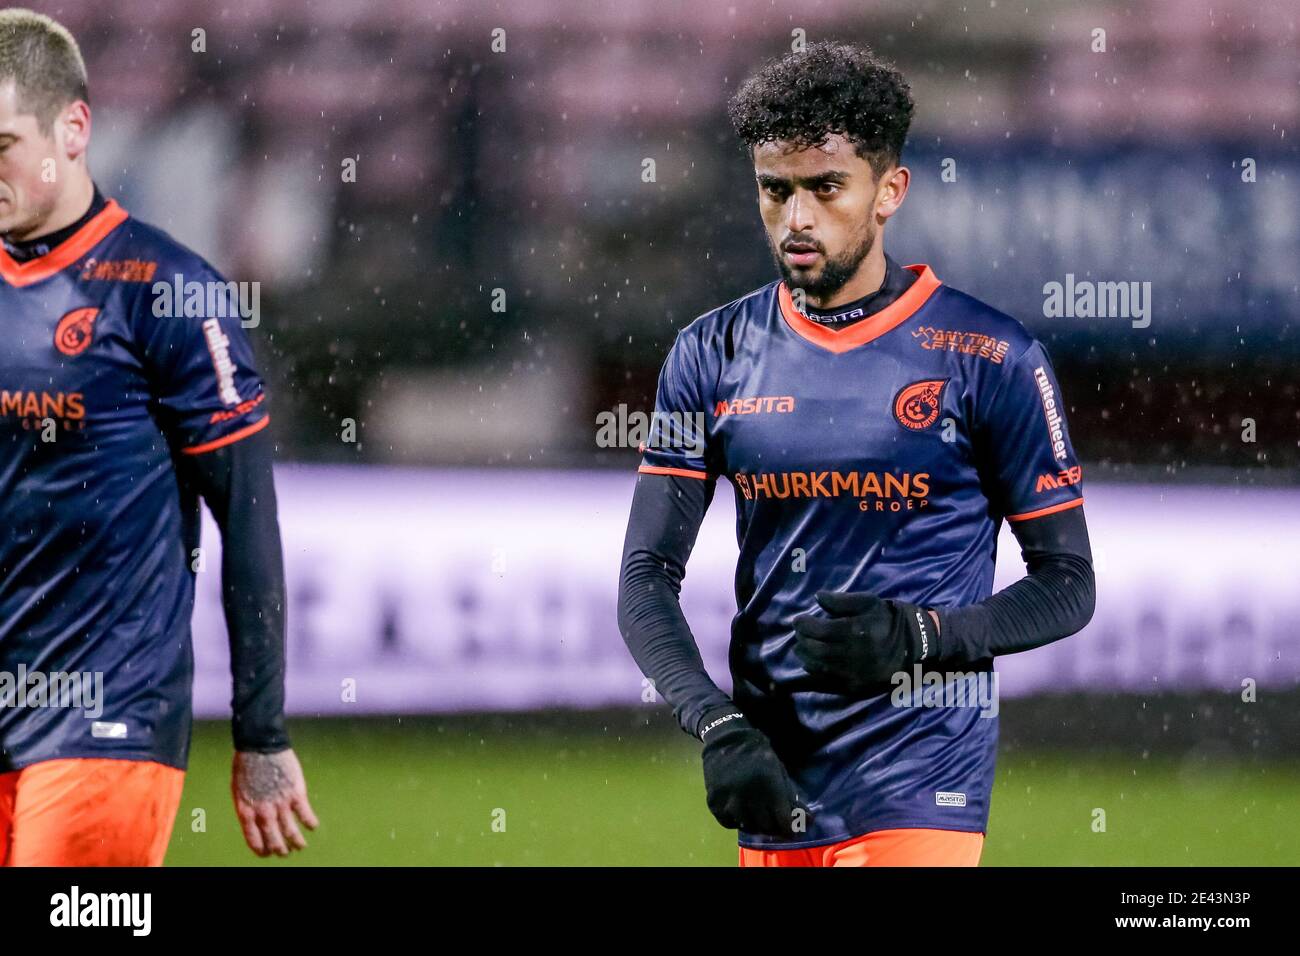 NIJMEGEN, NETHERLANDS - JANUARY 21: (L-R): Tesfaldet Tekie of Fortuna Sittard disappointed after defeat in extra time during the Dutch KNVB Cup match Stock Photo